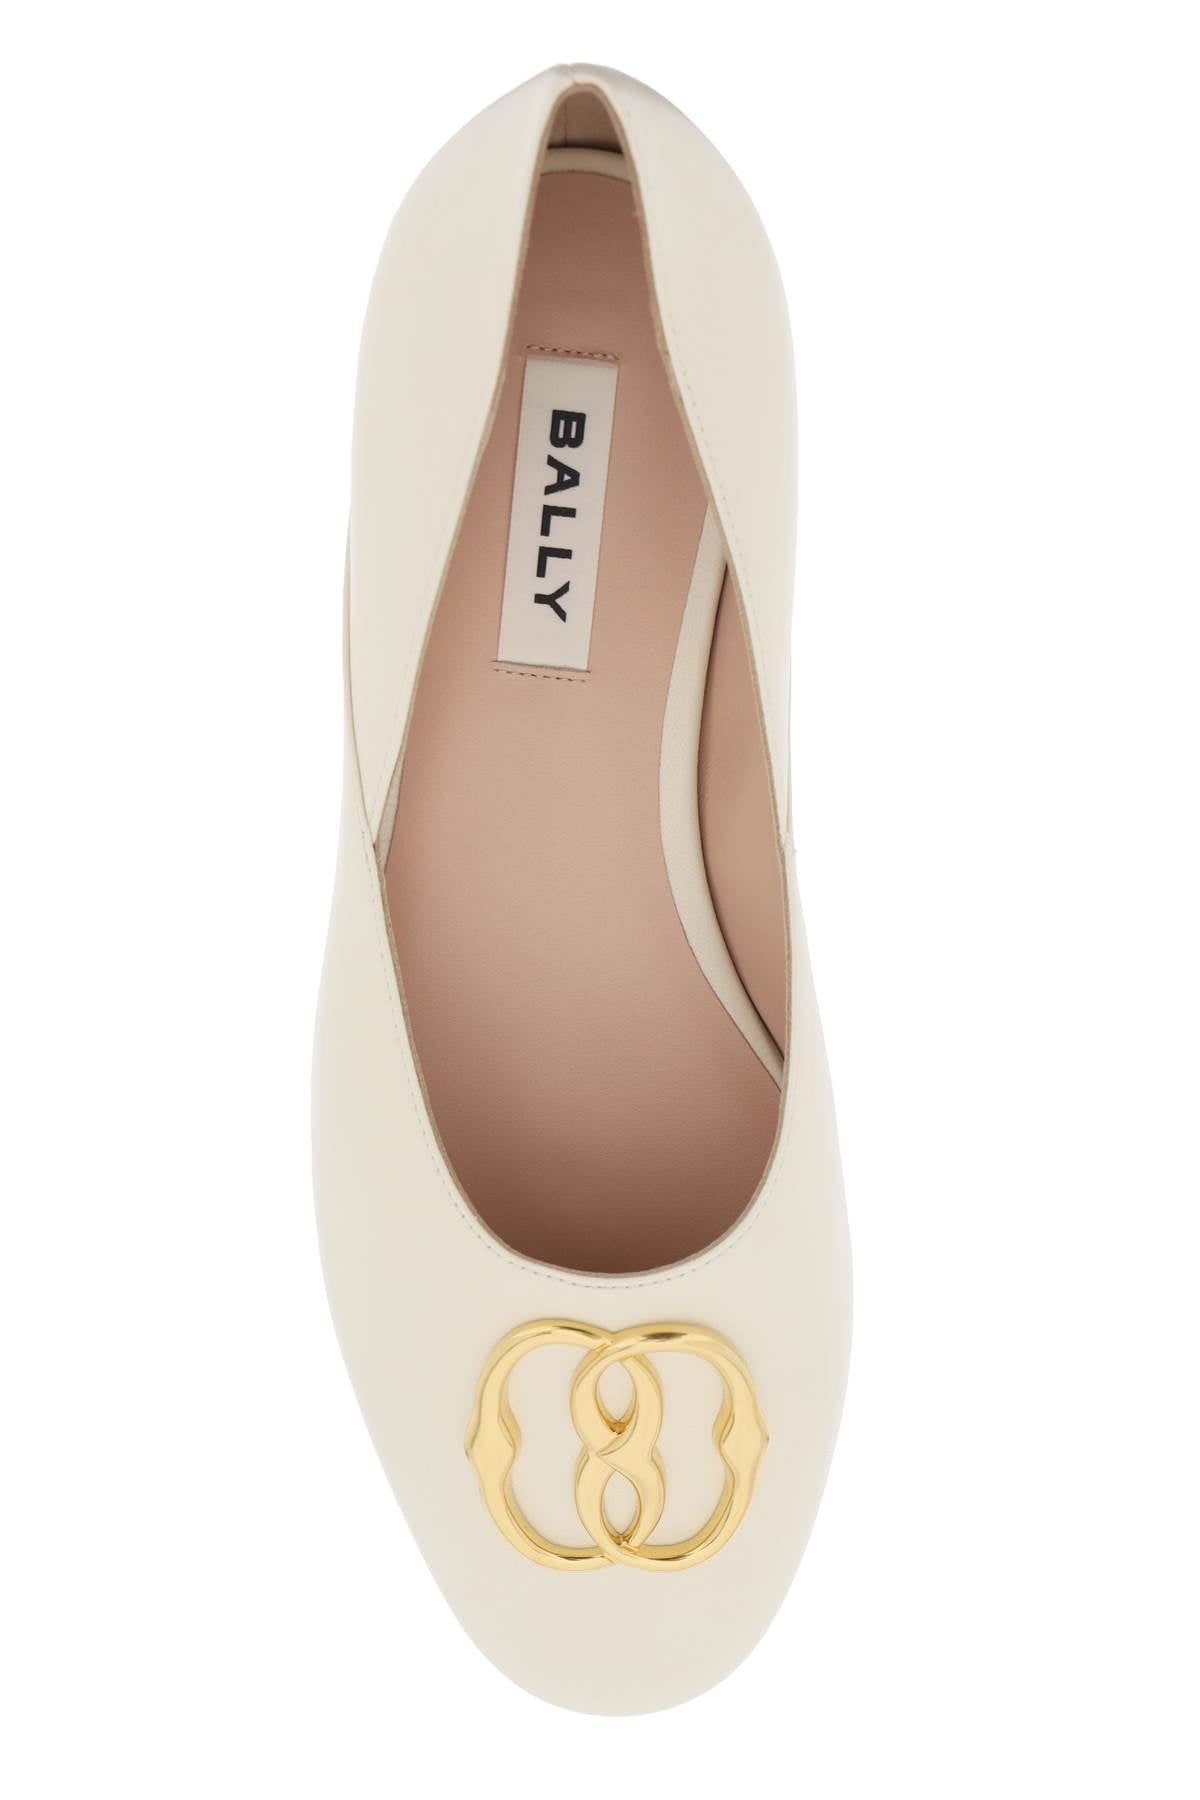 Elegant White Leather Ballet Flats for Every Occasion